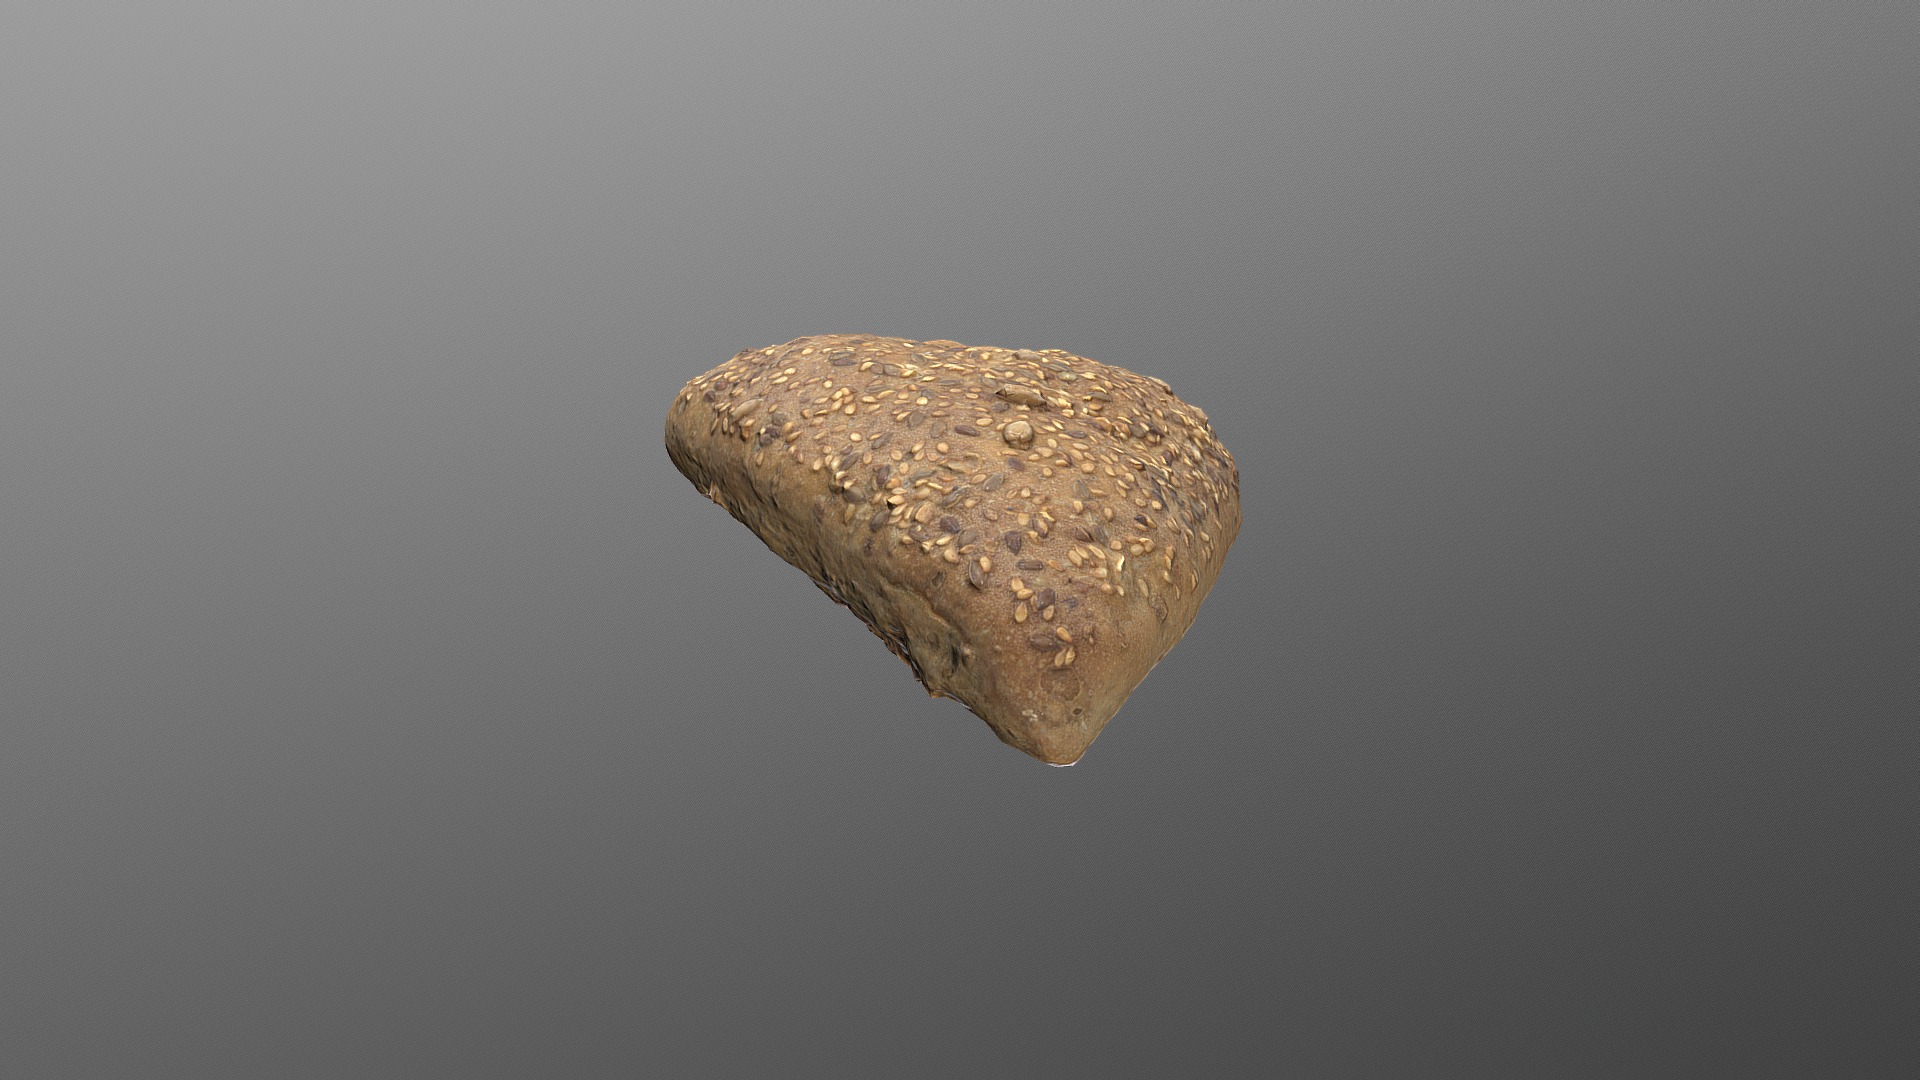 3D model Dreiecksbrötchen 3D Scan – Low Poly - This is a 3D model of the Dreiecksbrötchen 3D Scan - Low Poly. The 3D model is about a rock on a grey background.